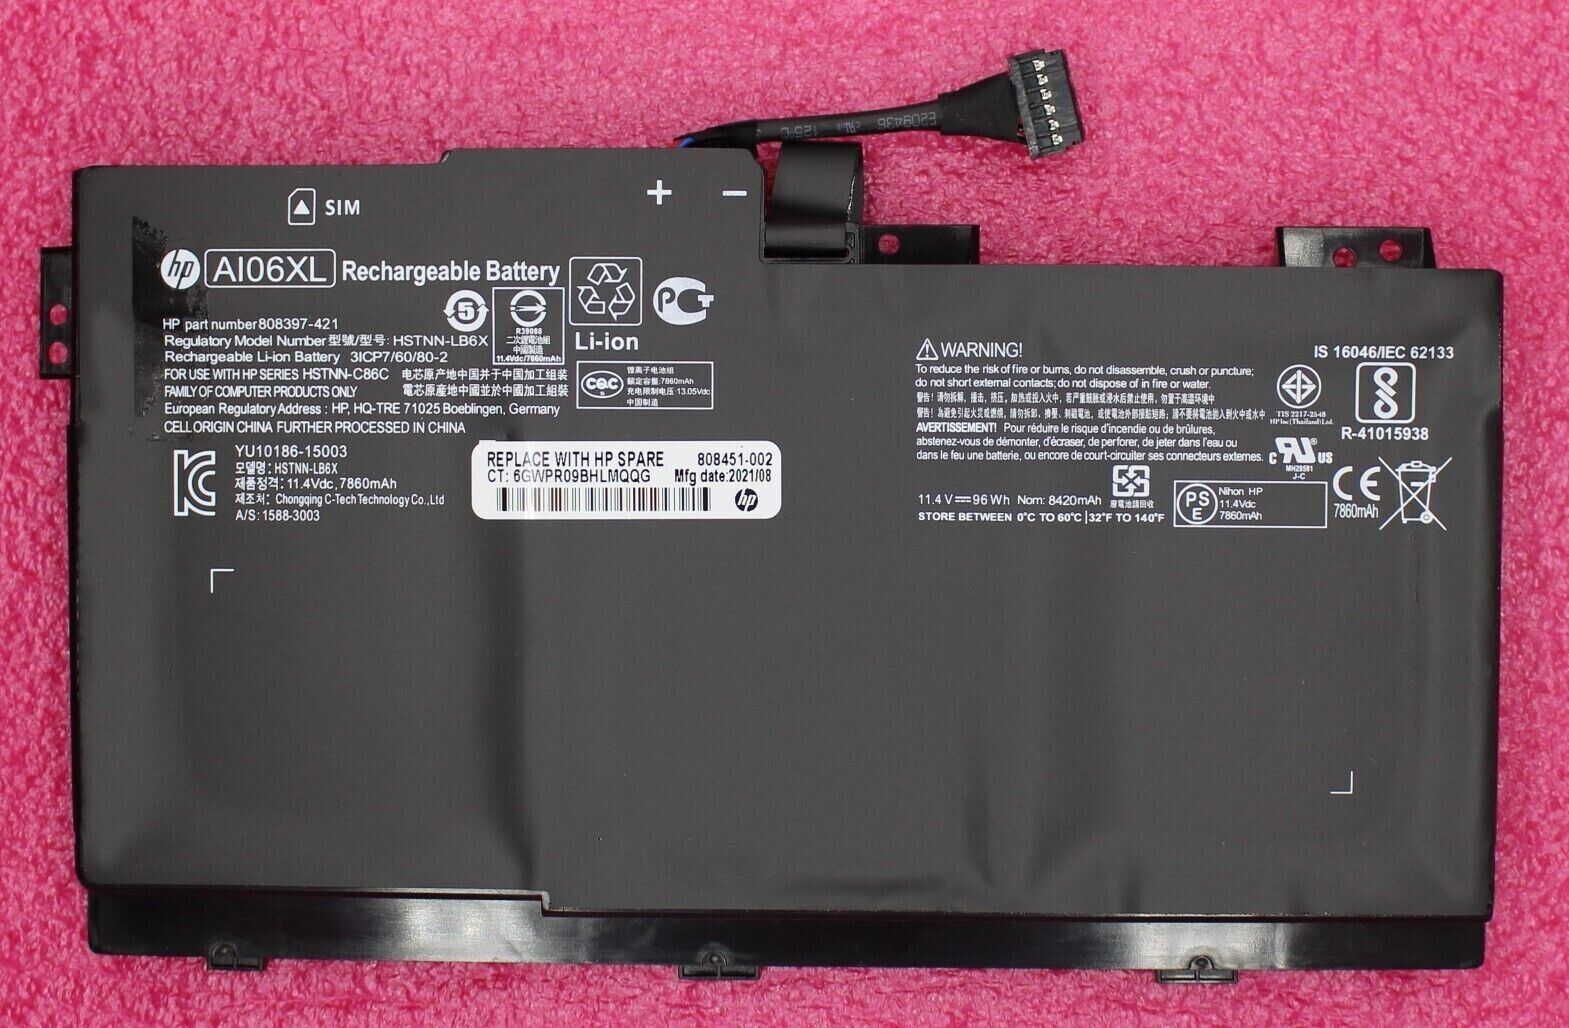 Genuine 96Wh AI06XL Battery For HP ZBook 17 G3 HSTNN-C86C 808451-002 808397-421